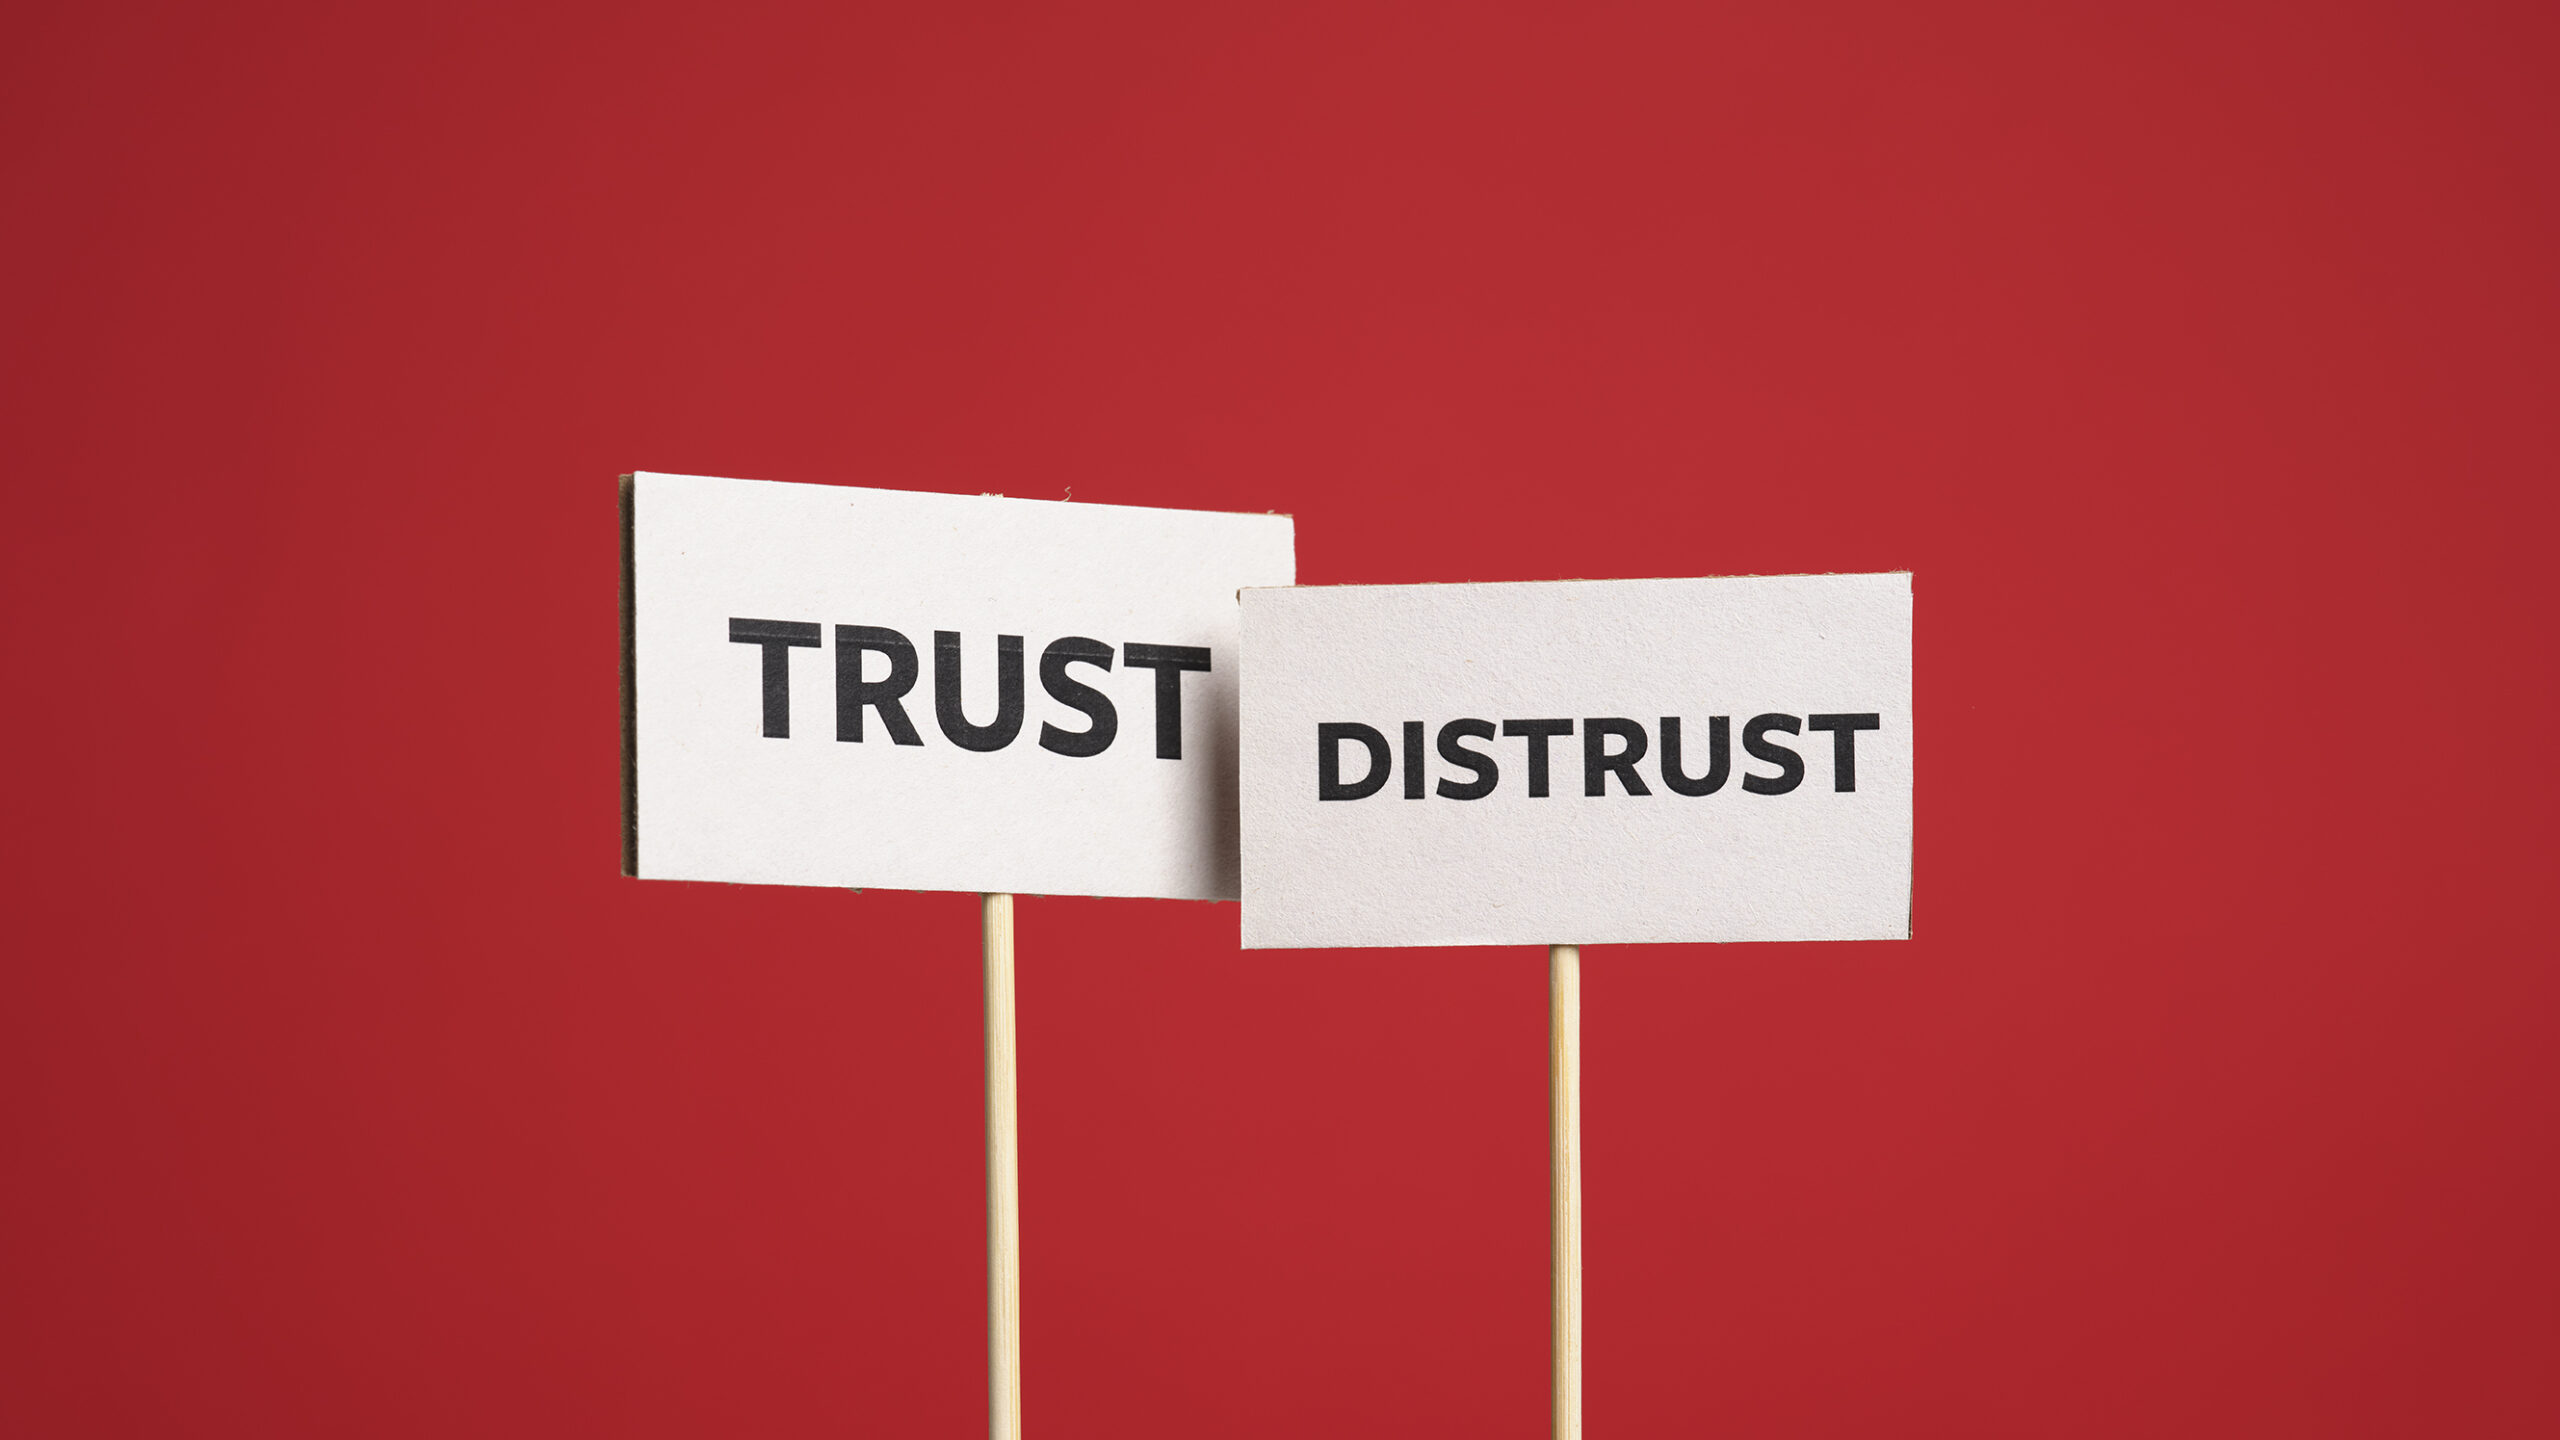 Two placards reading "Trust" and "Distrust", against a red background.